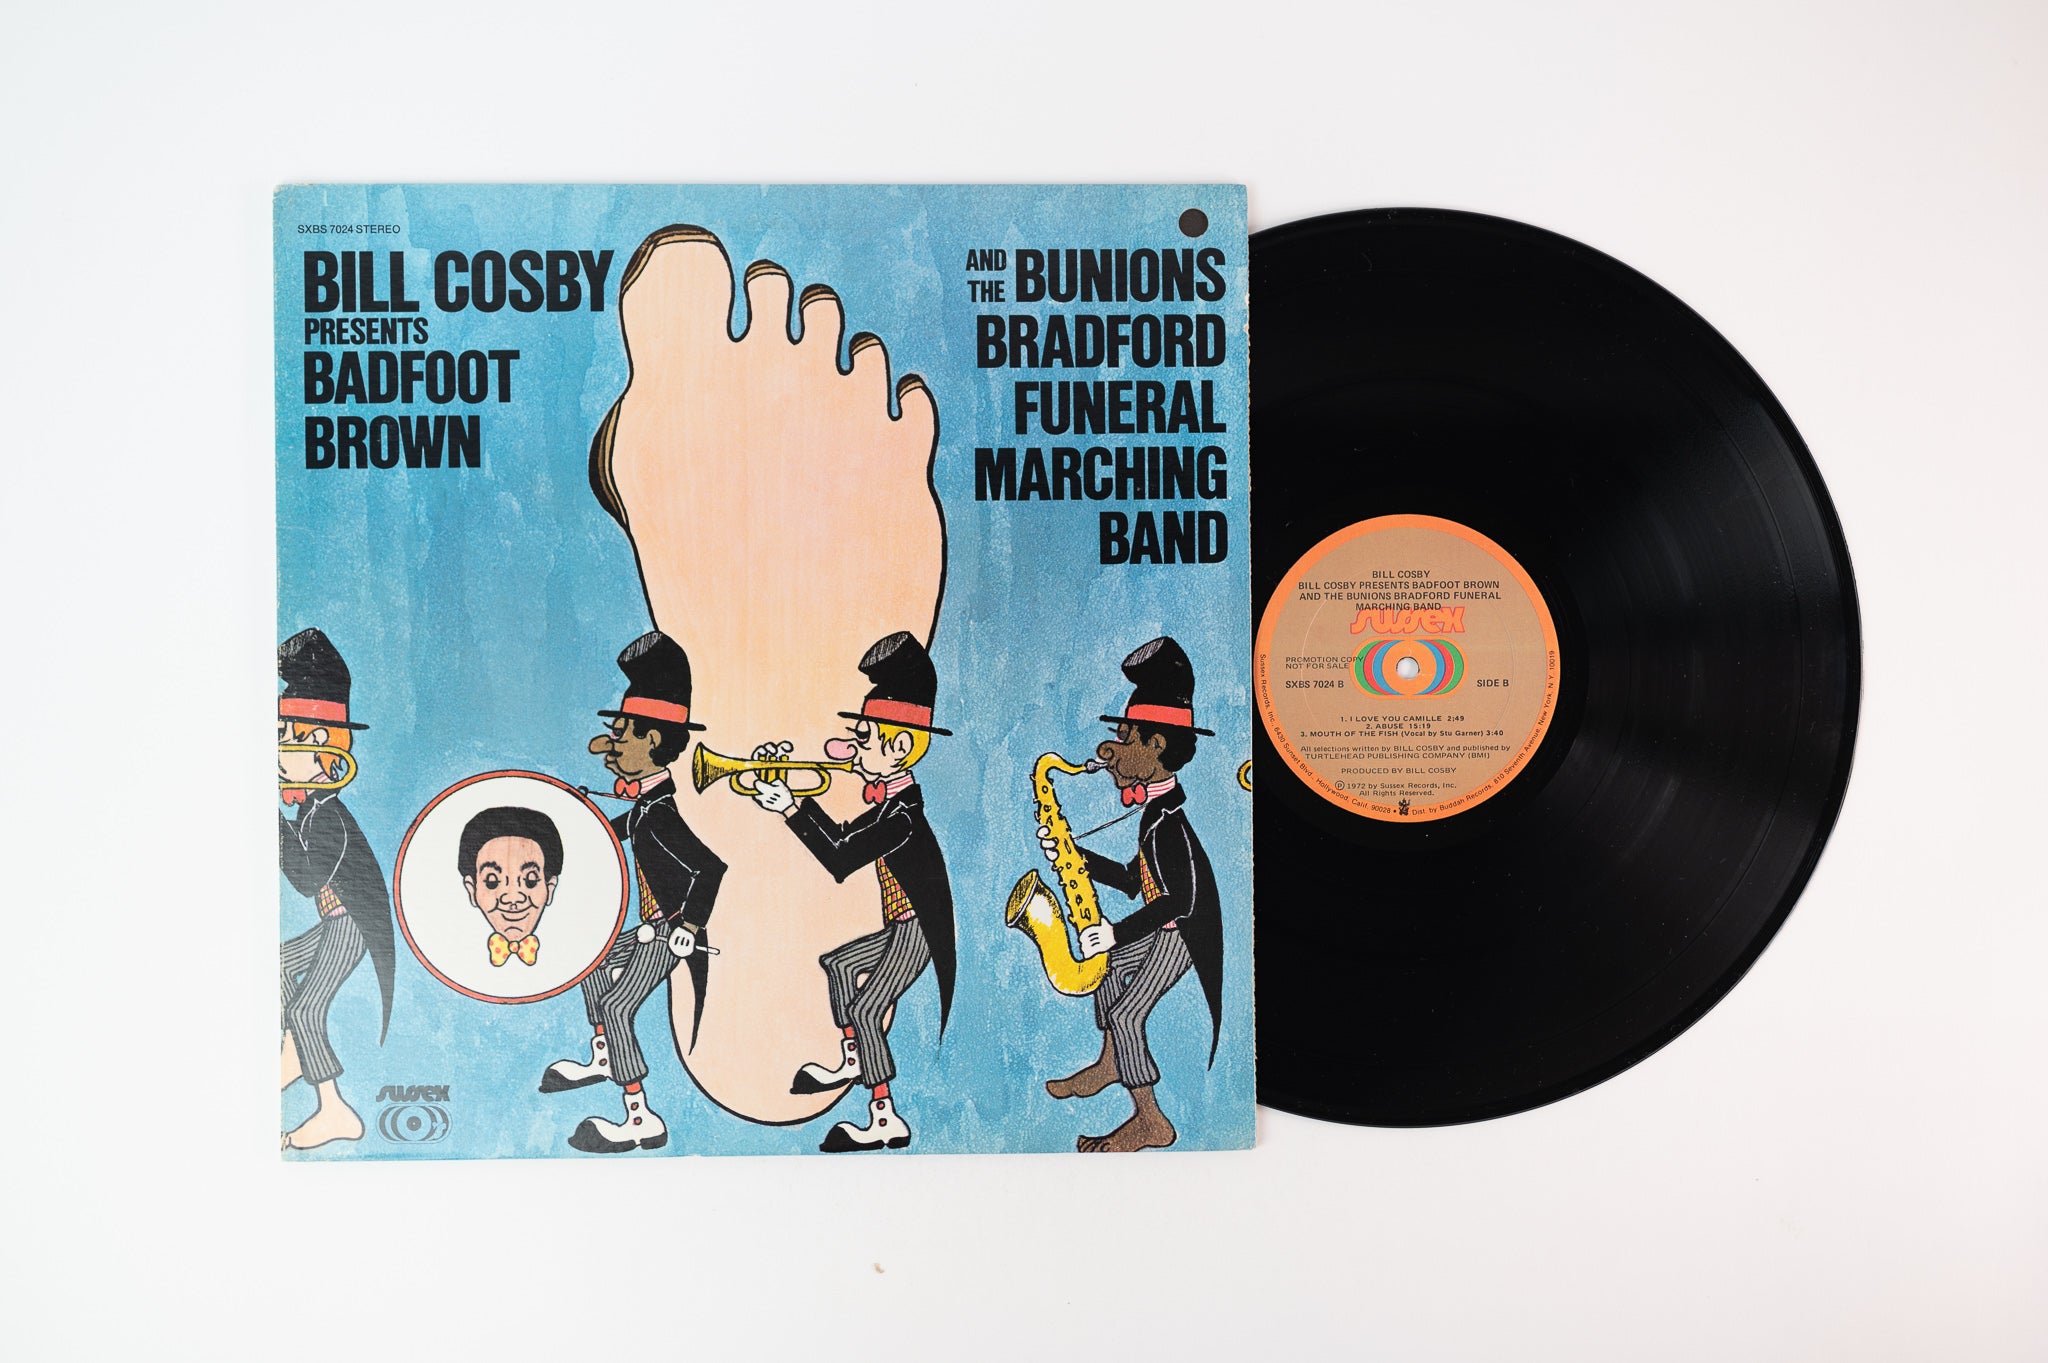 Bill Cosby - Badfoot Brown And The Bunions Bradford Funeral Marching Band on Sussex